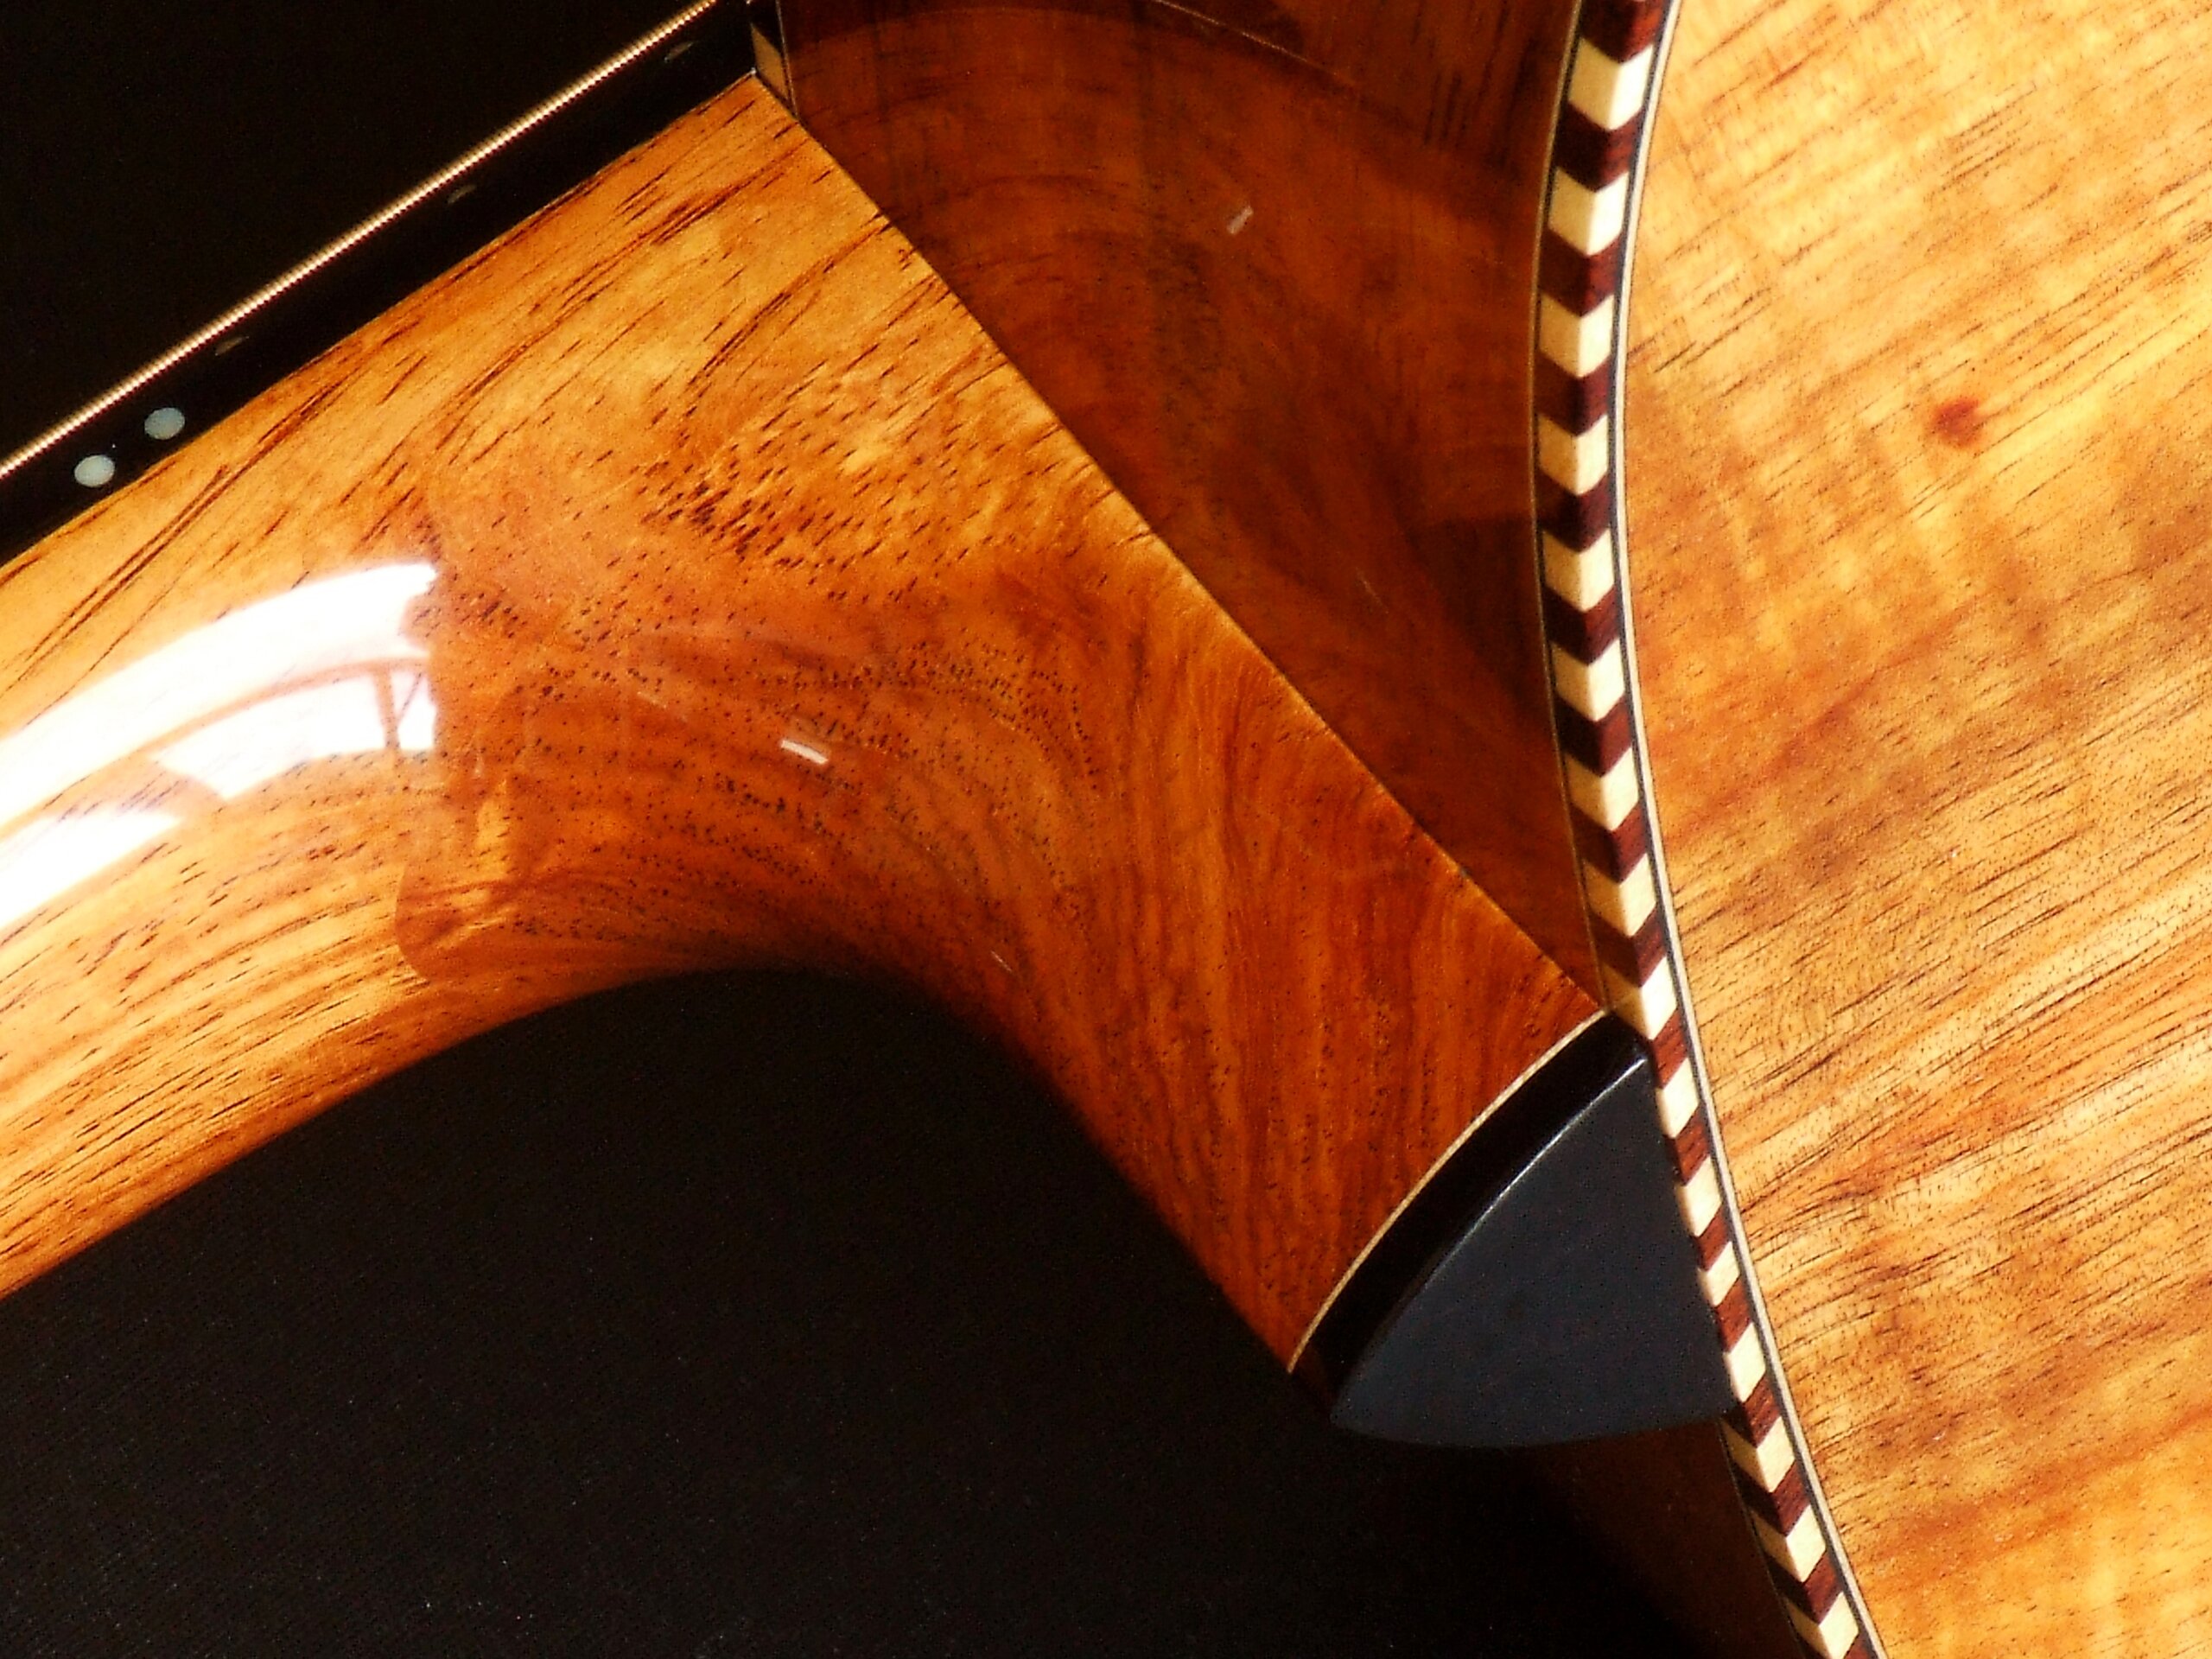 Neck heel detail on a guitar with rope binding